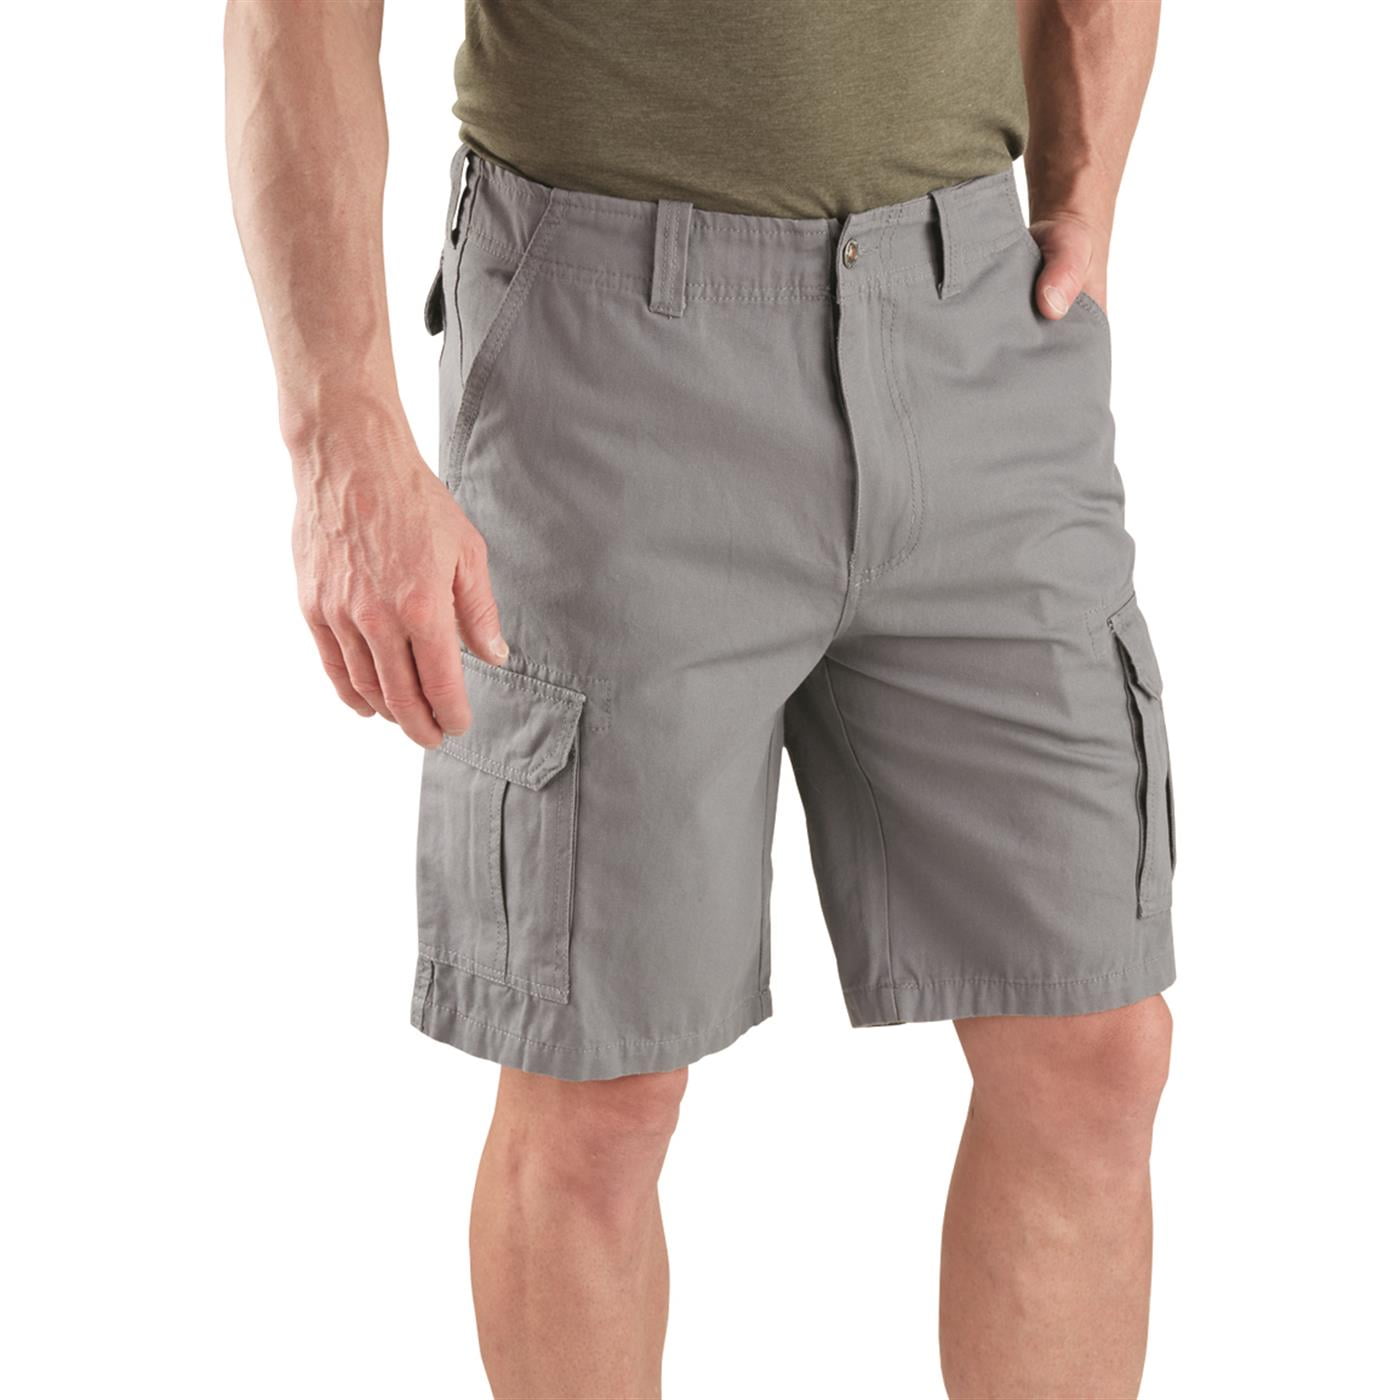 Guide Gear Men's Outdoor 2.0 Cargo Shorts, Fishing, Hiking, Casual,  Athletic, Summer, Outdoor Clothing 